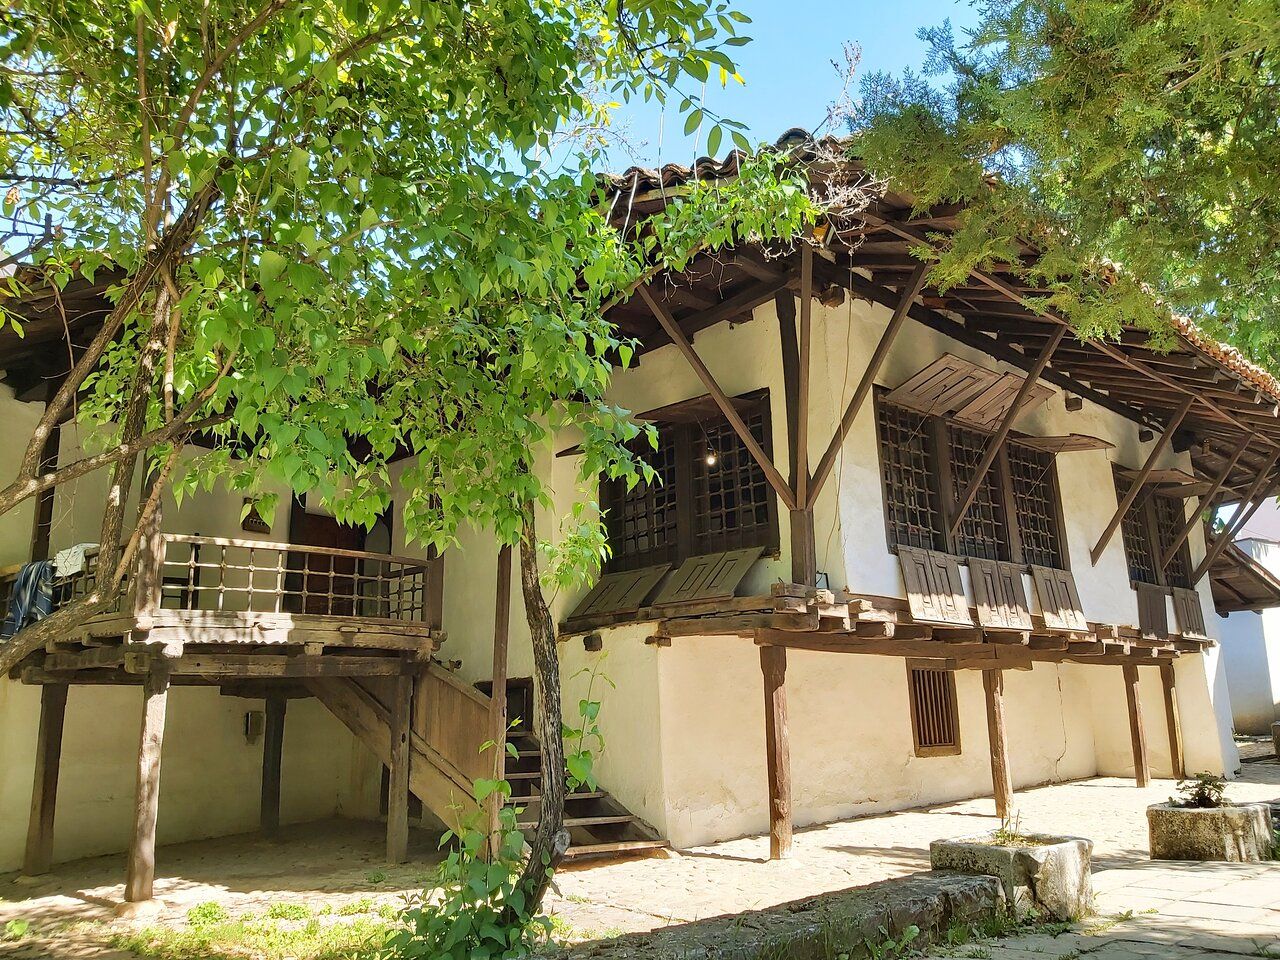 Ethnographic Museum (Muzeu Etnologjik) 
Typical traditional city architecture house from the XVIII century, and one of the oldest house in Prishtina, Kosova. 